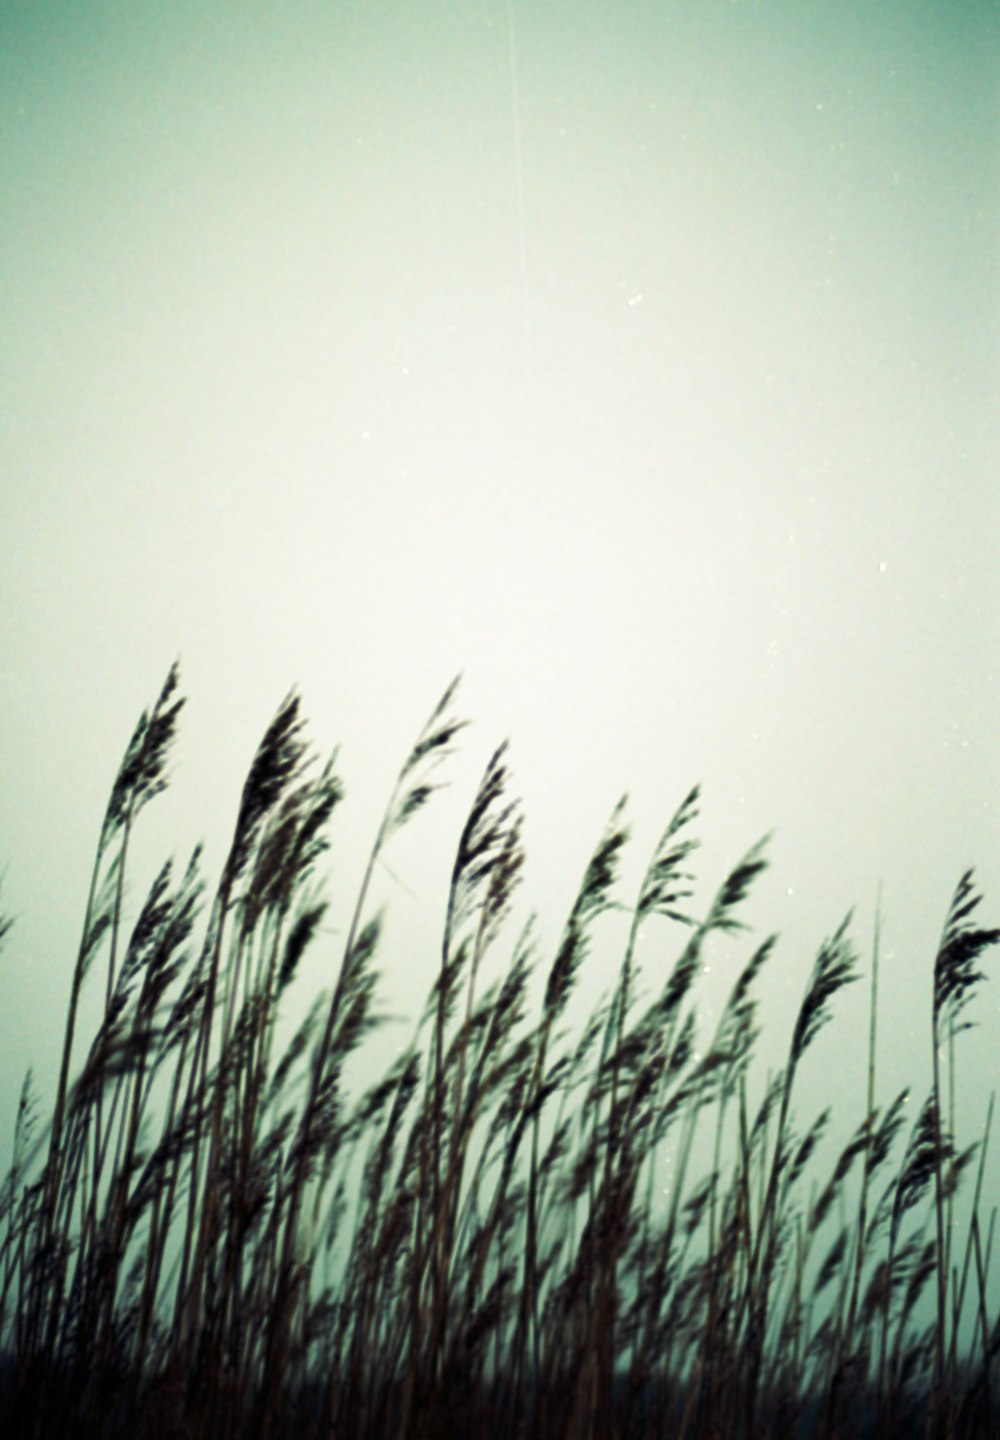 tall grass blowing in the wind on a cloudy day